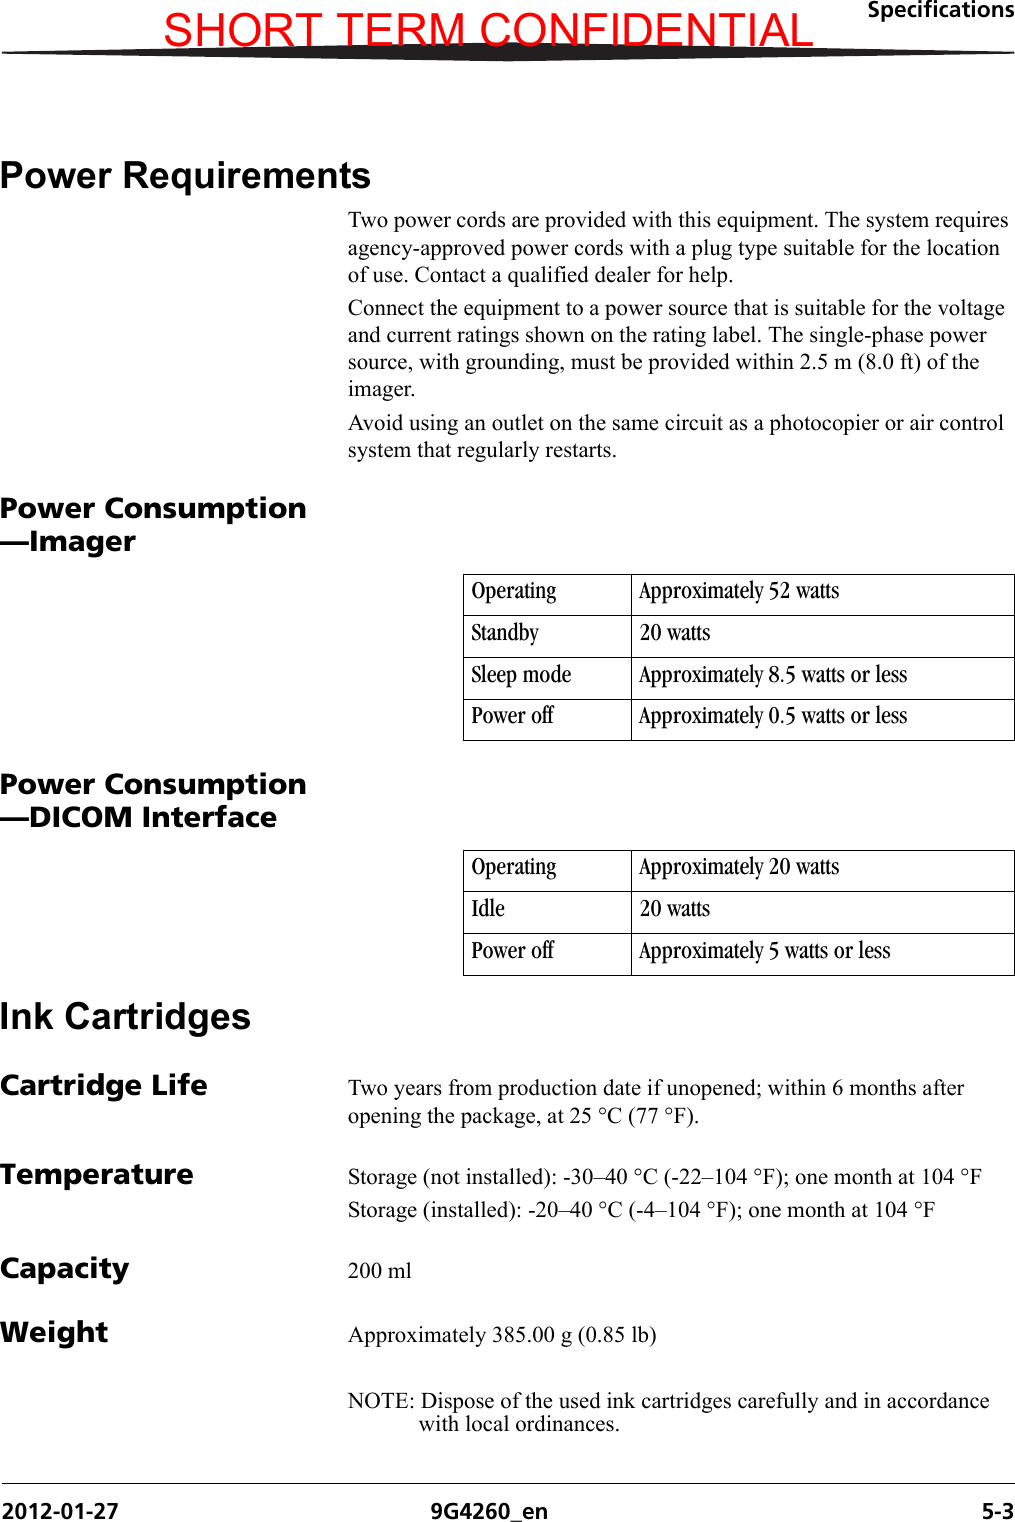 Specifications2012-01-27 9G4260_en 5-3Power RequirementsTwo power cords are provided with this equipment. The system requires agency-approved power cords with a plug type suitable for the location of use. Contact a qualified dealer for help.Connect the equipment to a power source that is suitable for the voltage and current ratings shown on the rating label. The single-phase power source, with grounding, must be provided within 2.5 m (8.0 ft) of the imager.Avoid using an outlet on the same circuit as a photocopier or air control system that regularly restarts.Power Consumption—ImagerPower Consumption—DICOM InterfaceInk CartridgesCartridge Life Two years from production date if unopened; within 6 months after opening the package, at 25 °C (77 °F).Temperature Storage (not installed): -30–40 °C (-22–104 °F); one month at 104 °FStorage (installed): -20–40 °C (-4–104 °F); one month at 104 °FCapacity 200 mlWeight Approximately 385.00 g (0.85 lb)NOTE: Dispose of the used ink cartridges carefully and in accordance with local ordinances.Operating Approximately 52 wattsStandby 20 wattsSleep mode Approximately 8.5 watts or lessPower off Approximately 0.5 watts or lessOperating Approximately 20 wattsIdle 20 wattsPower off Approximately 5 watts or lessSHORT TERM CONFIDENTIAL